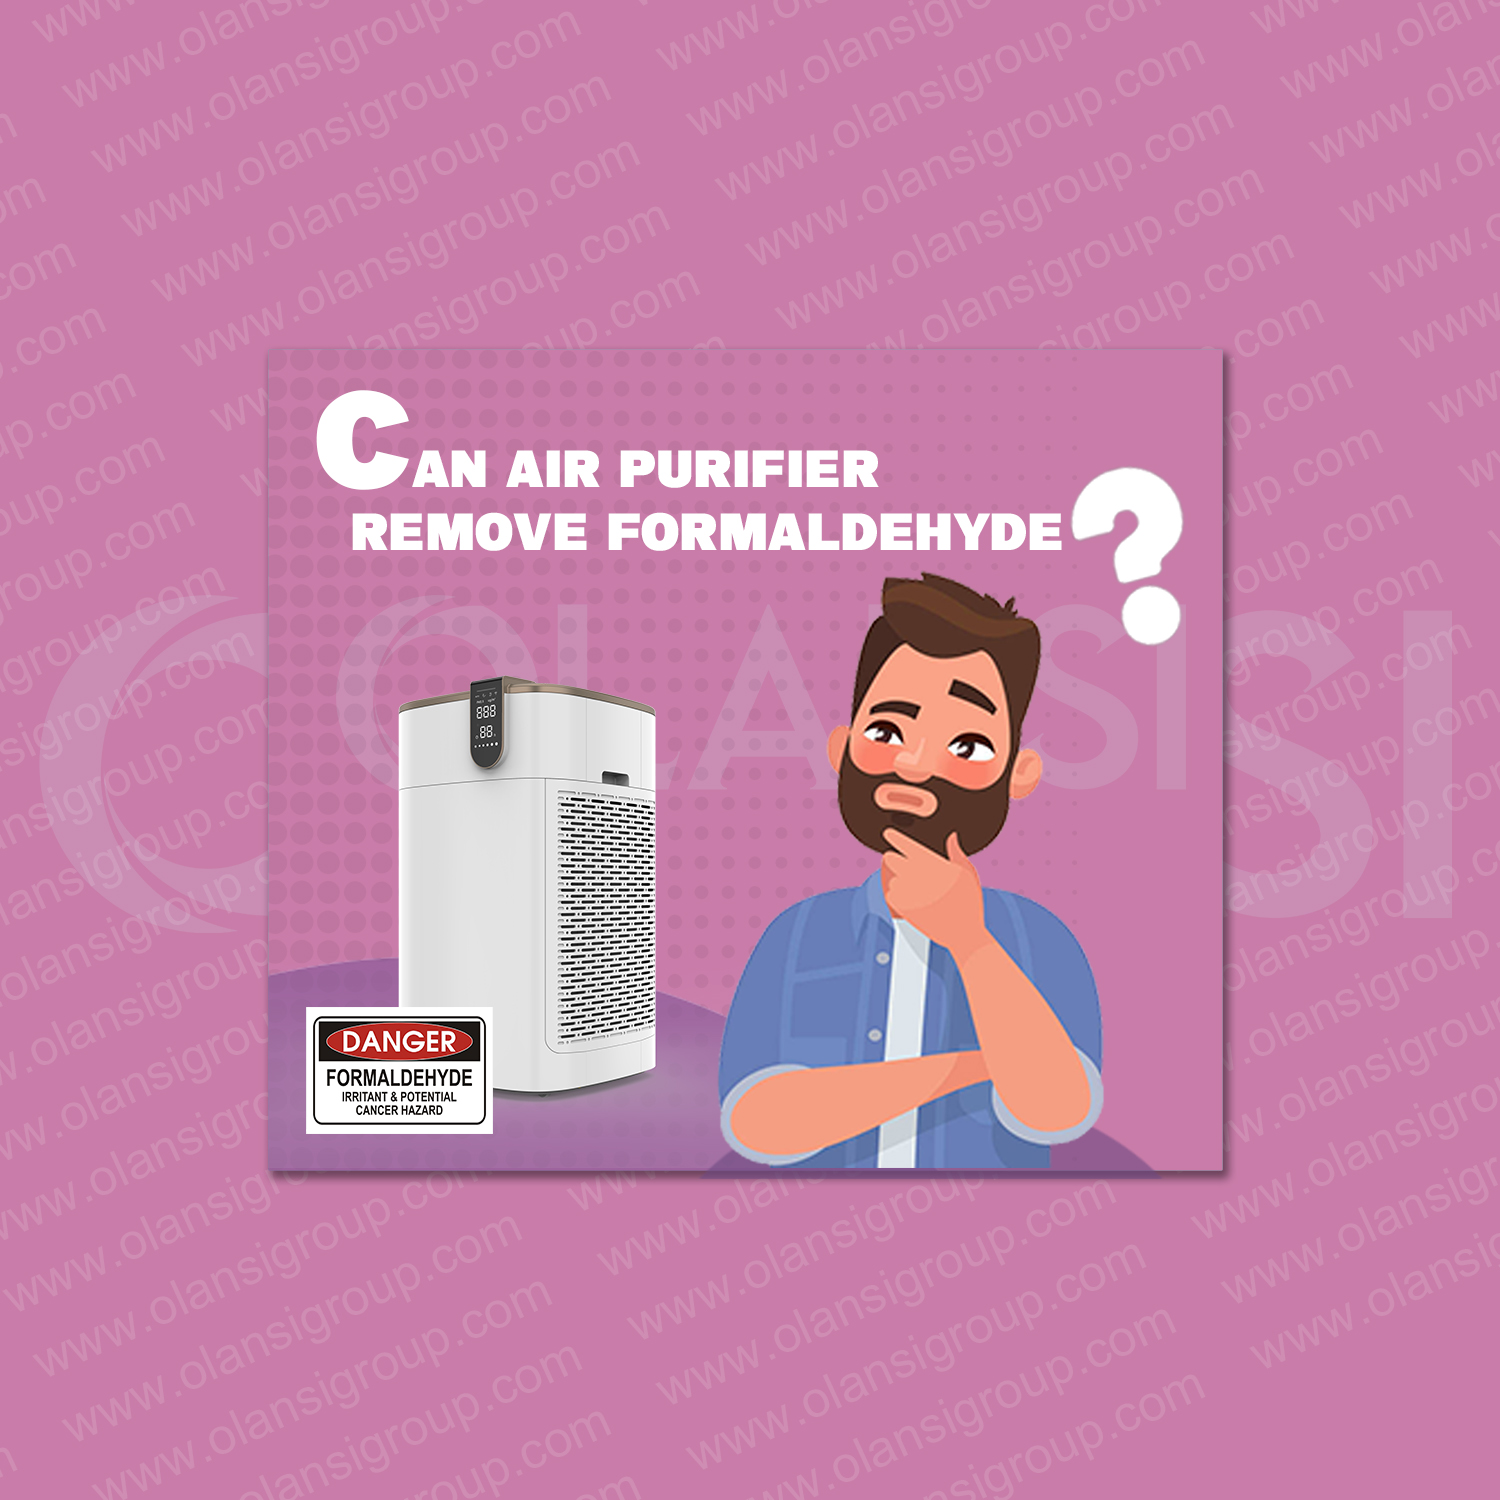 Can formaldehyde be removed by air purifier?